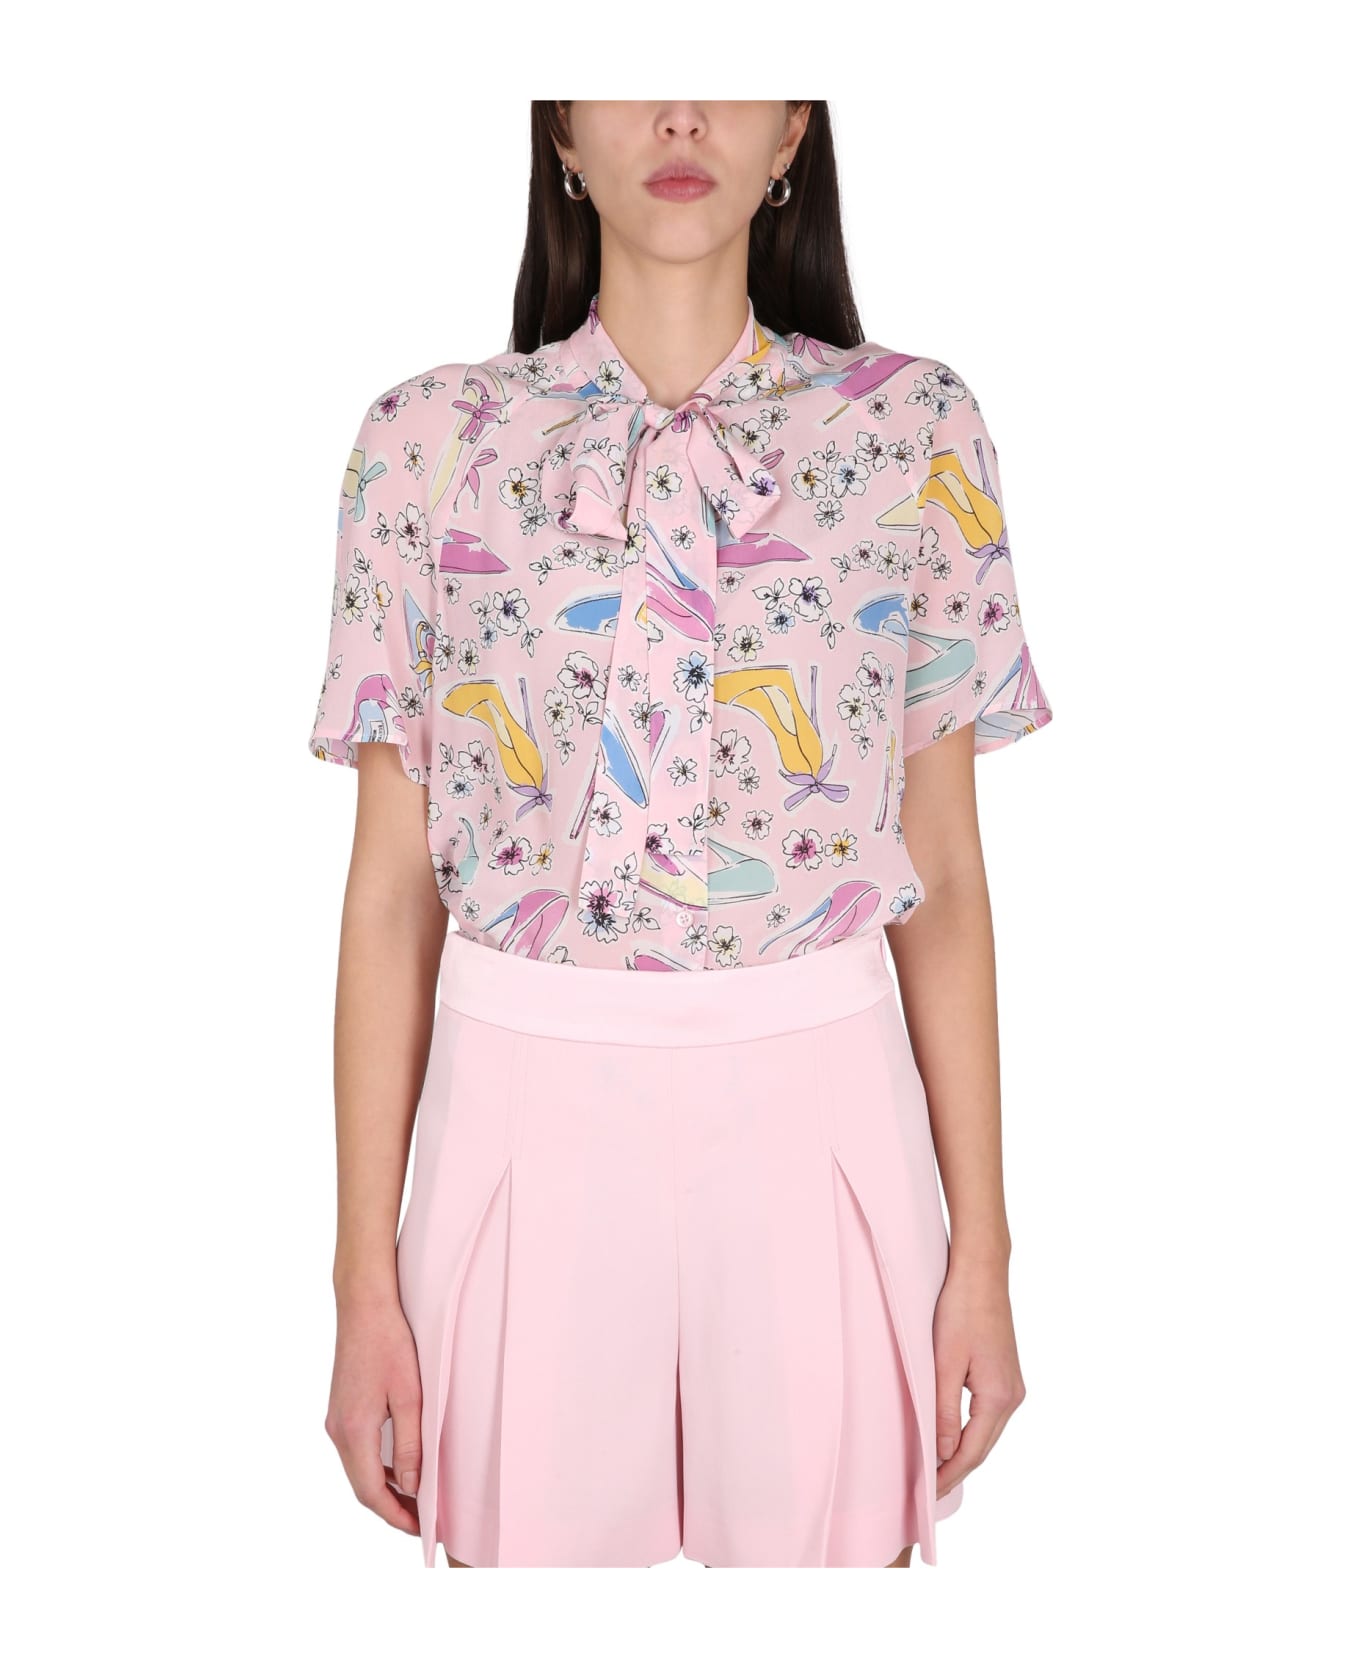 Boutique Moschino Heels And Flowers Shirt - ROSA